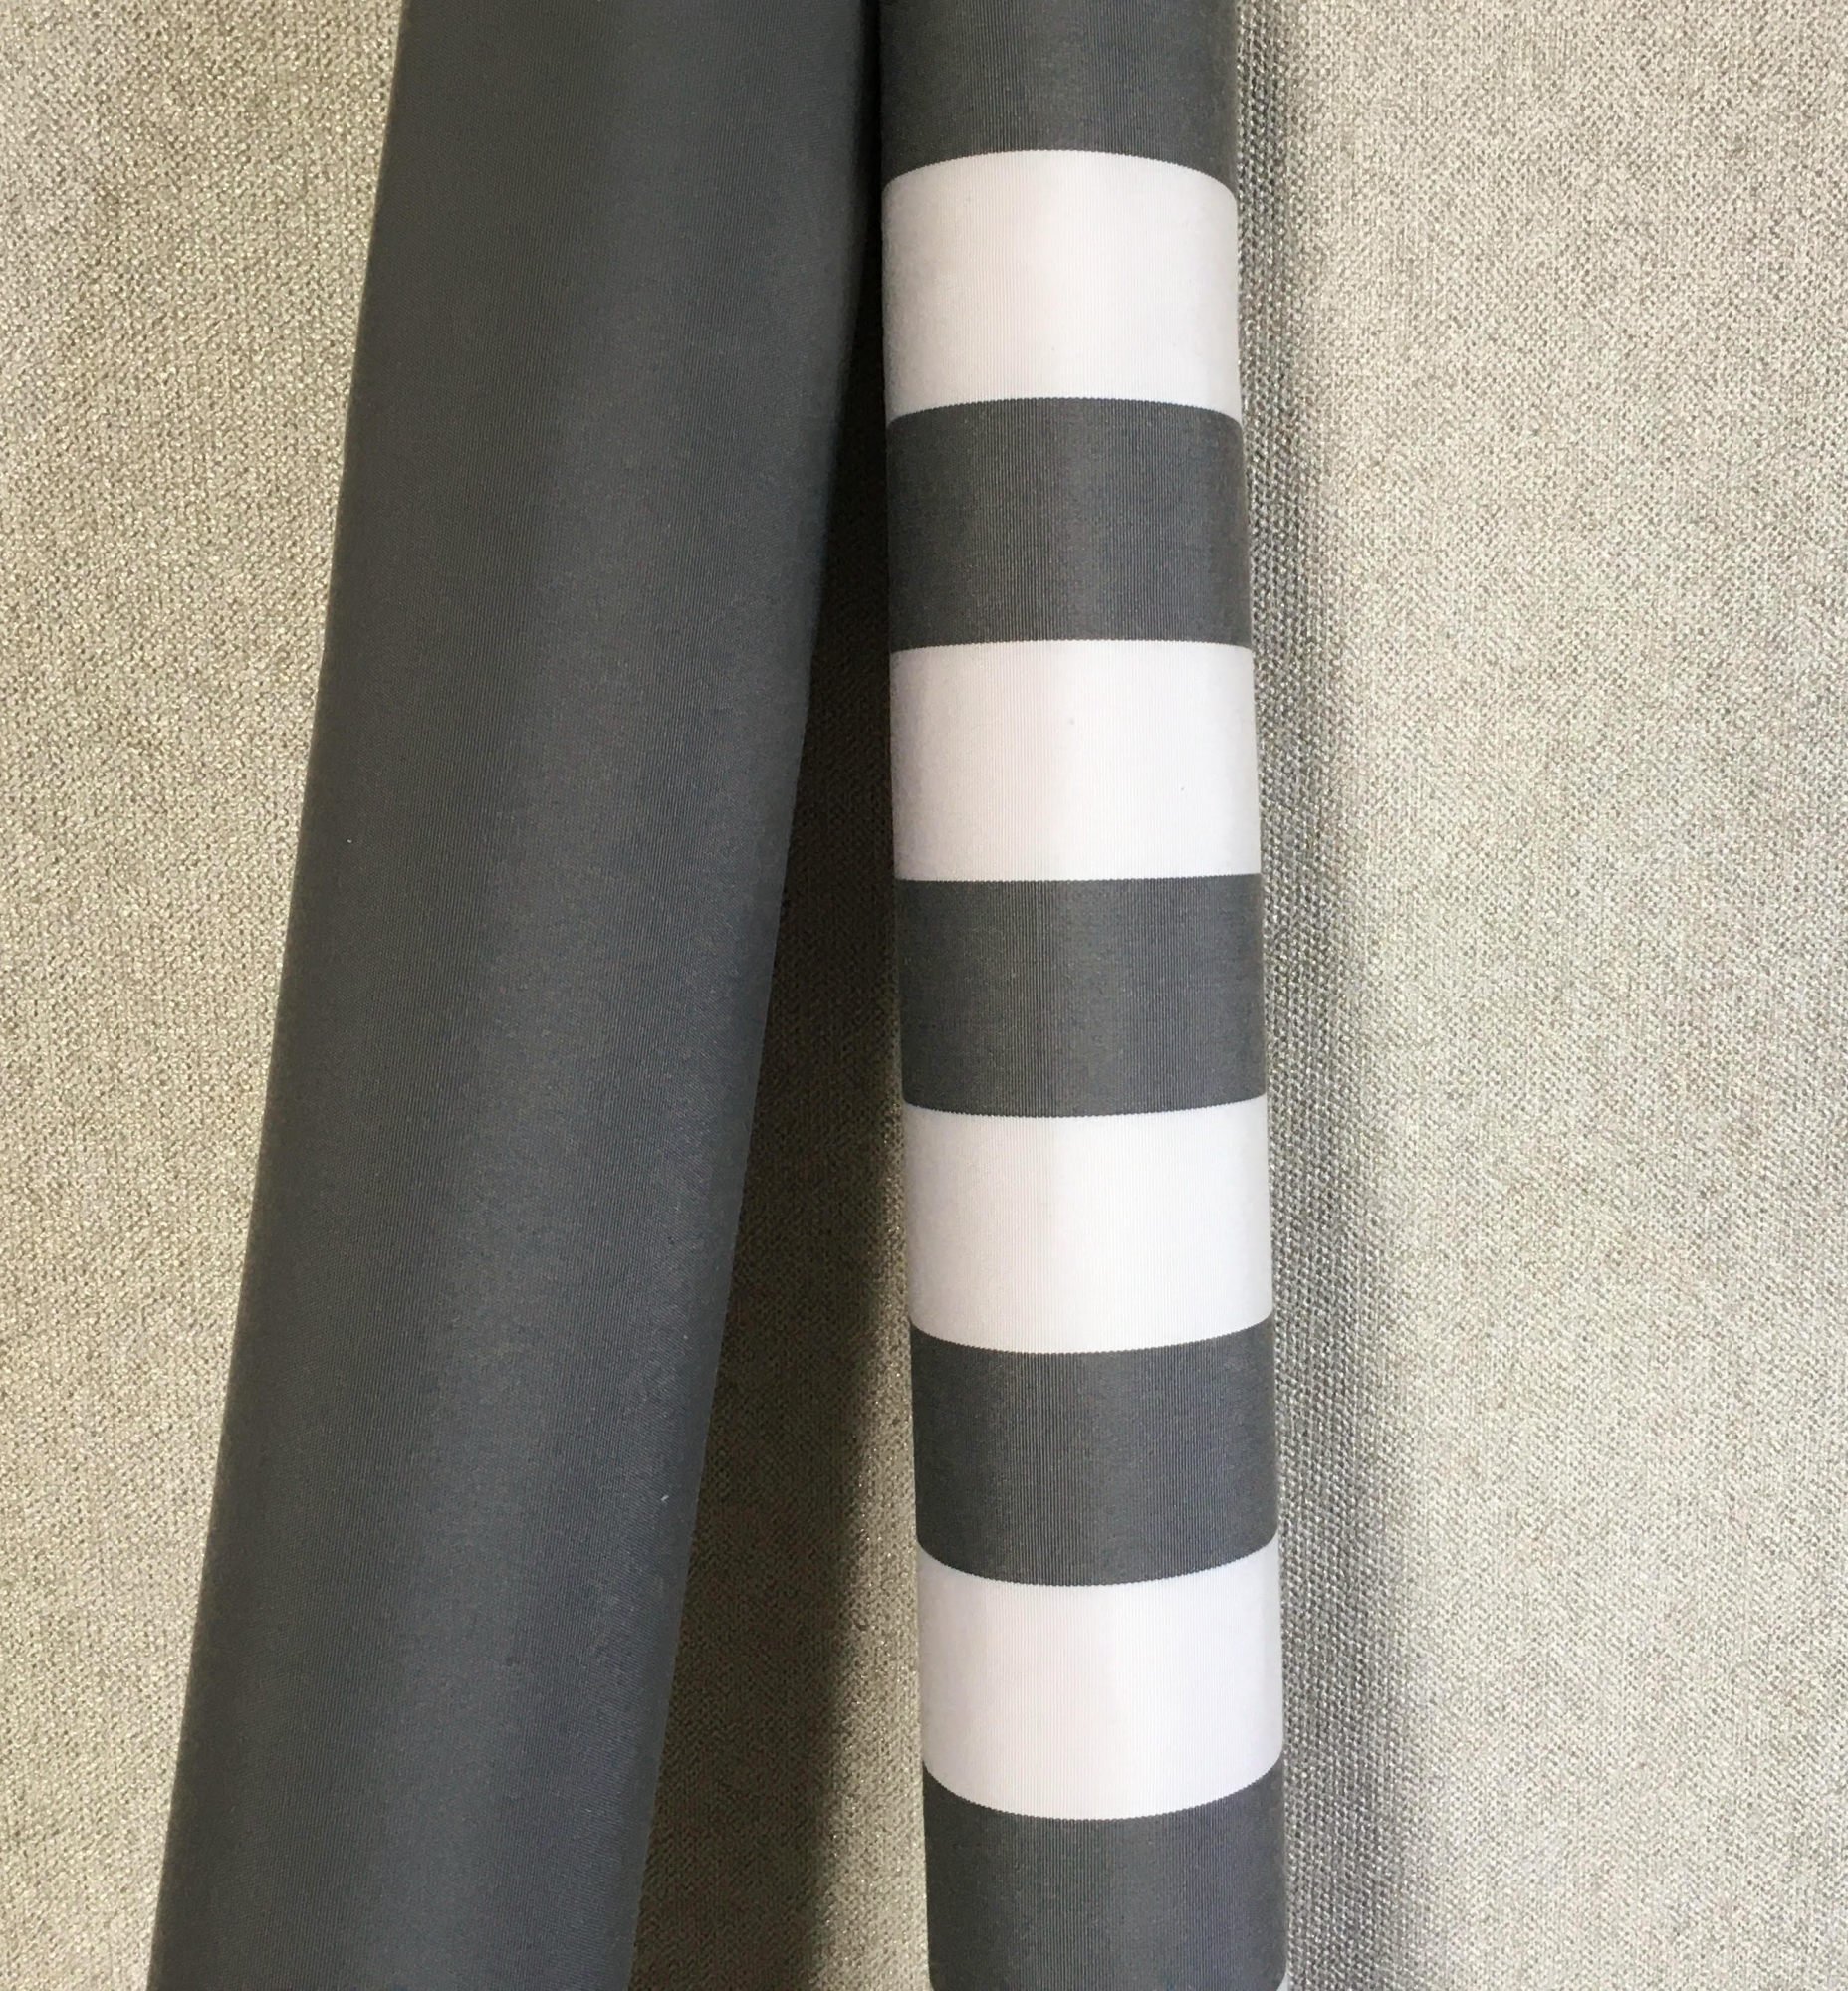 Yacht stripes in grey & white with complimenting charcoal grey from Sunbrella Cushions® for durable yacht exterior cushions.